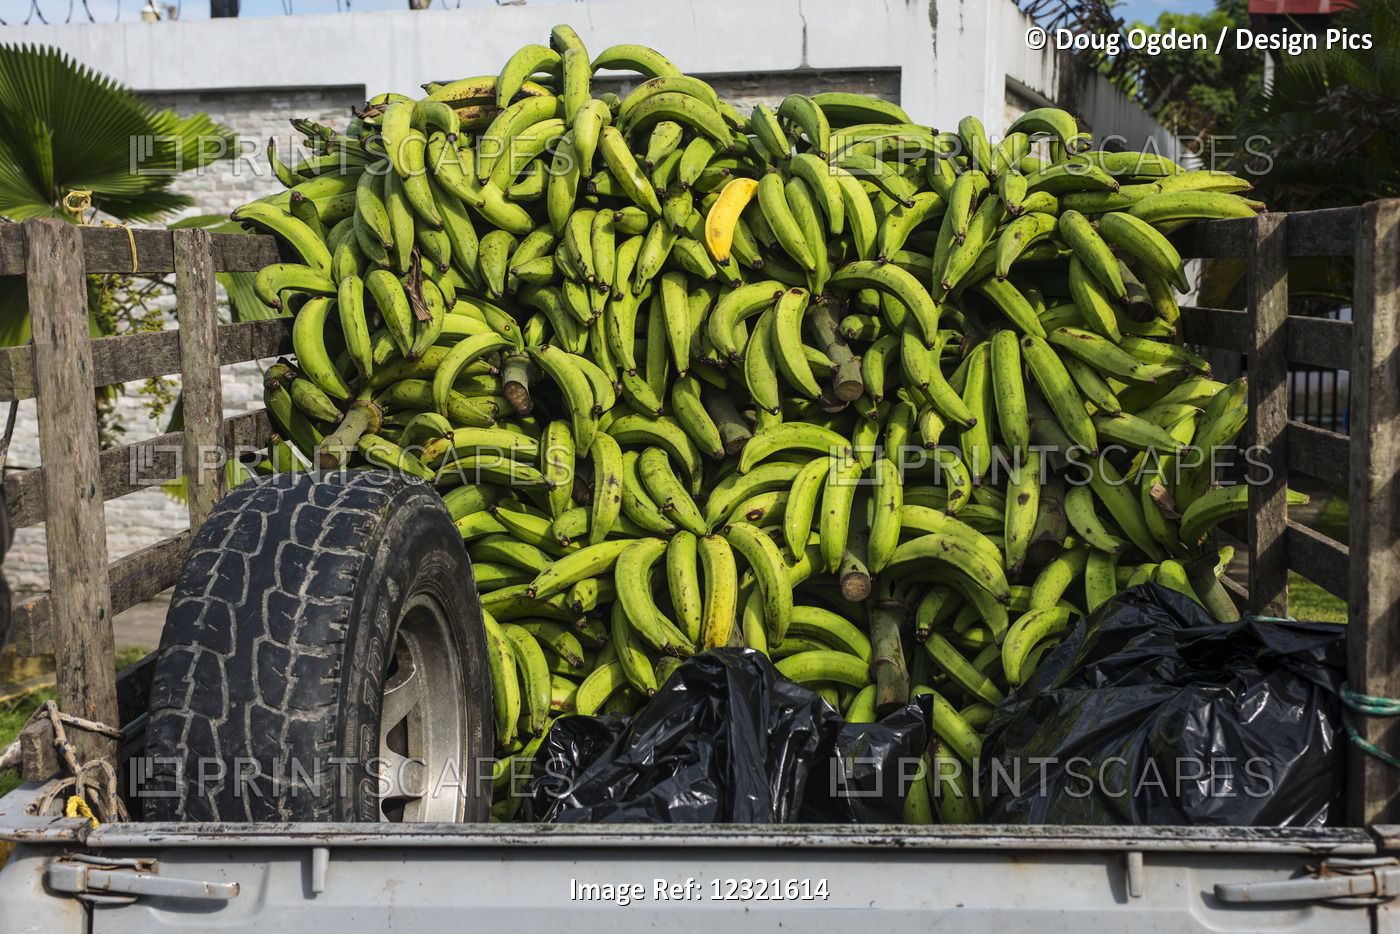 A Load Of Green Bananas And One Yellow One On The Way To Market, The Bananas ...